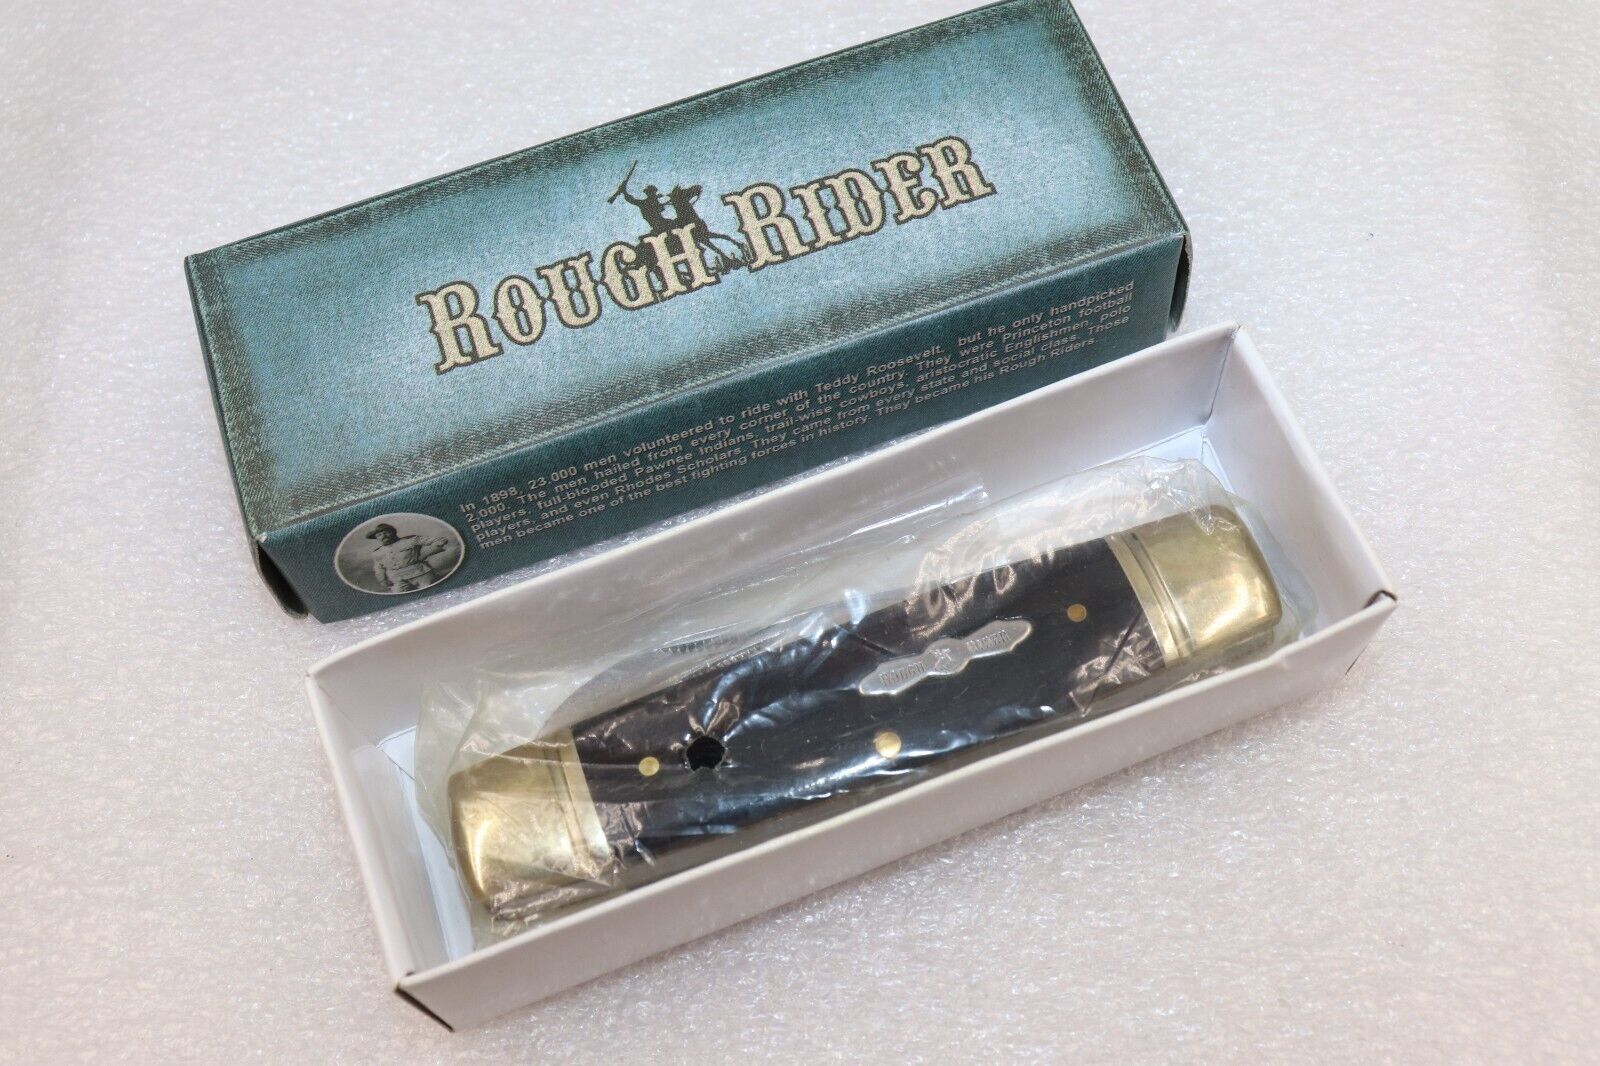 Rough Rider RR1044 BOXCAR Whittler Pocket Knife NOS Discontinued